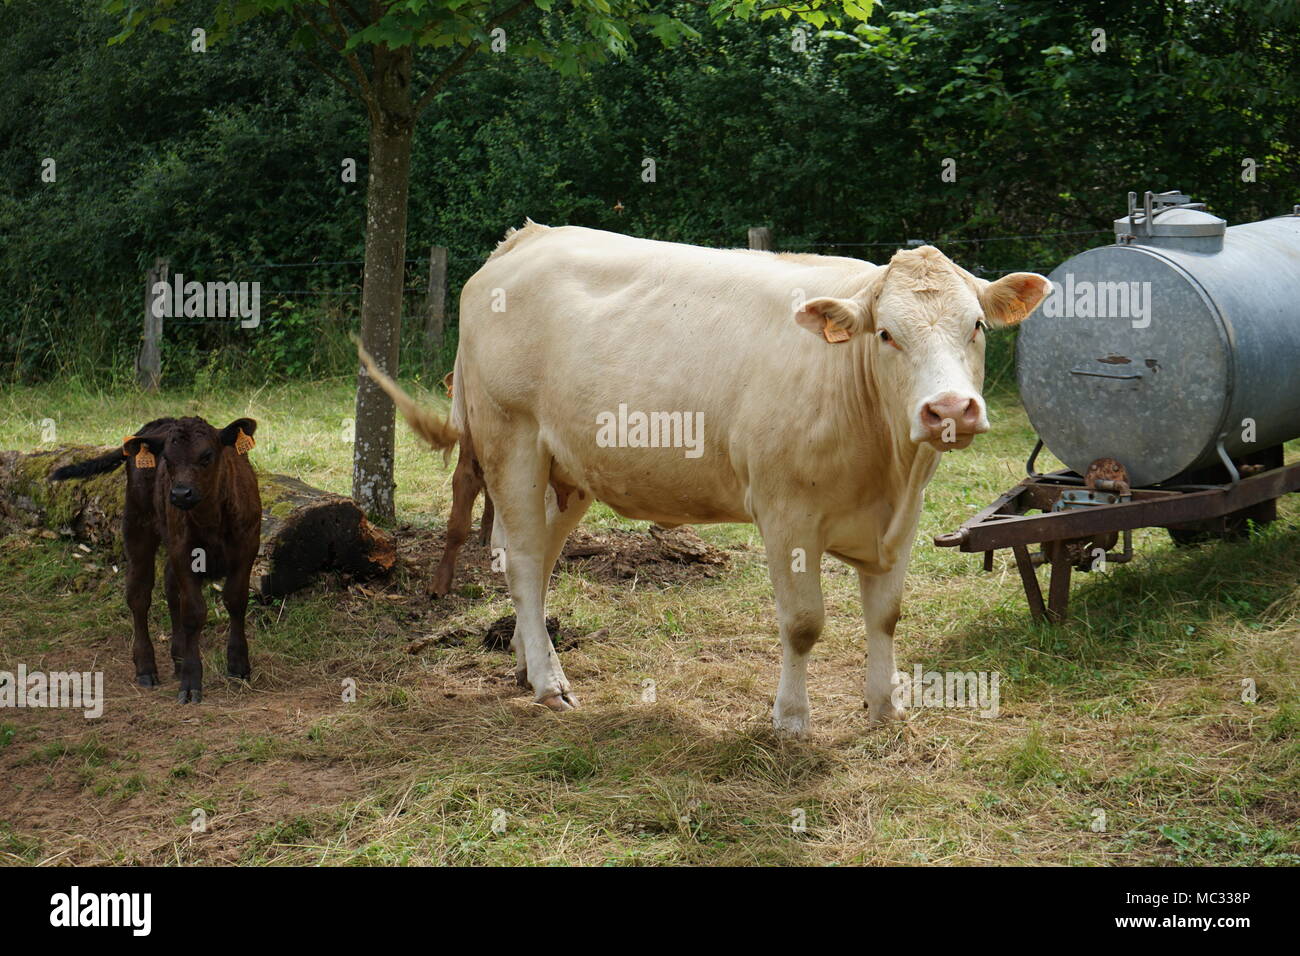 White Cows with a white Calf out at Pasture, cattle watering tank, Germany Stock Photo